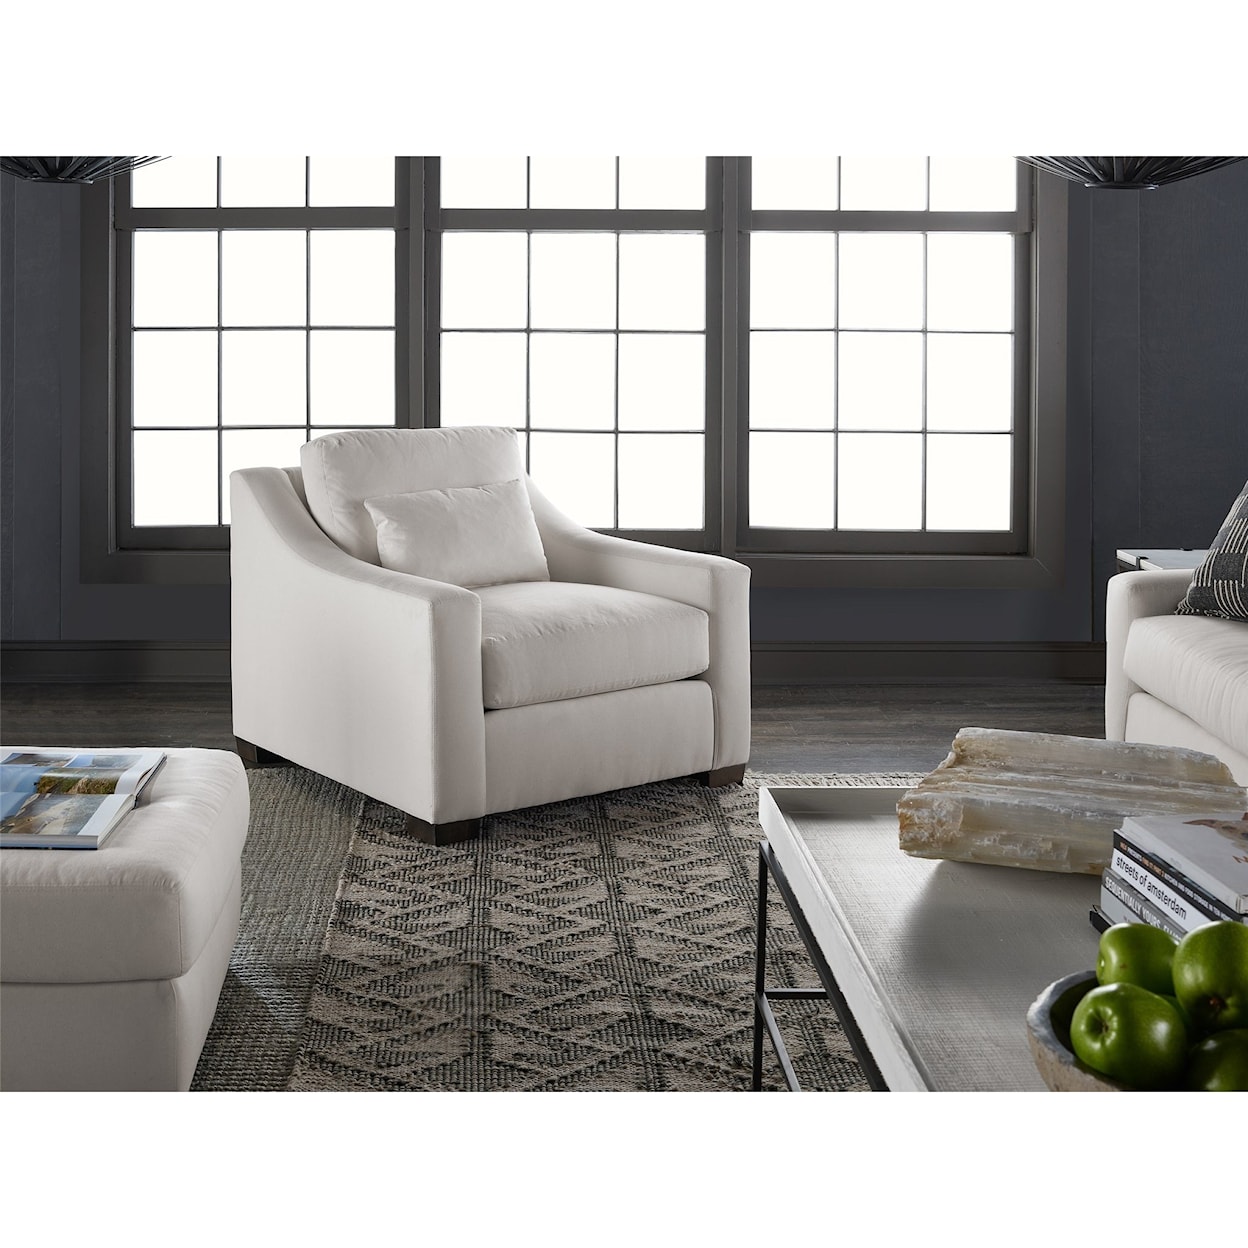 Universal Brooke Upholstered Chair